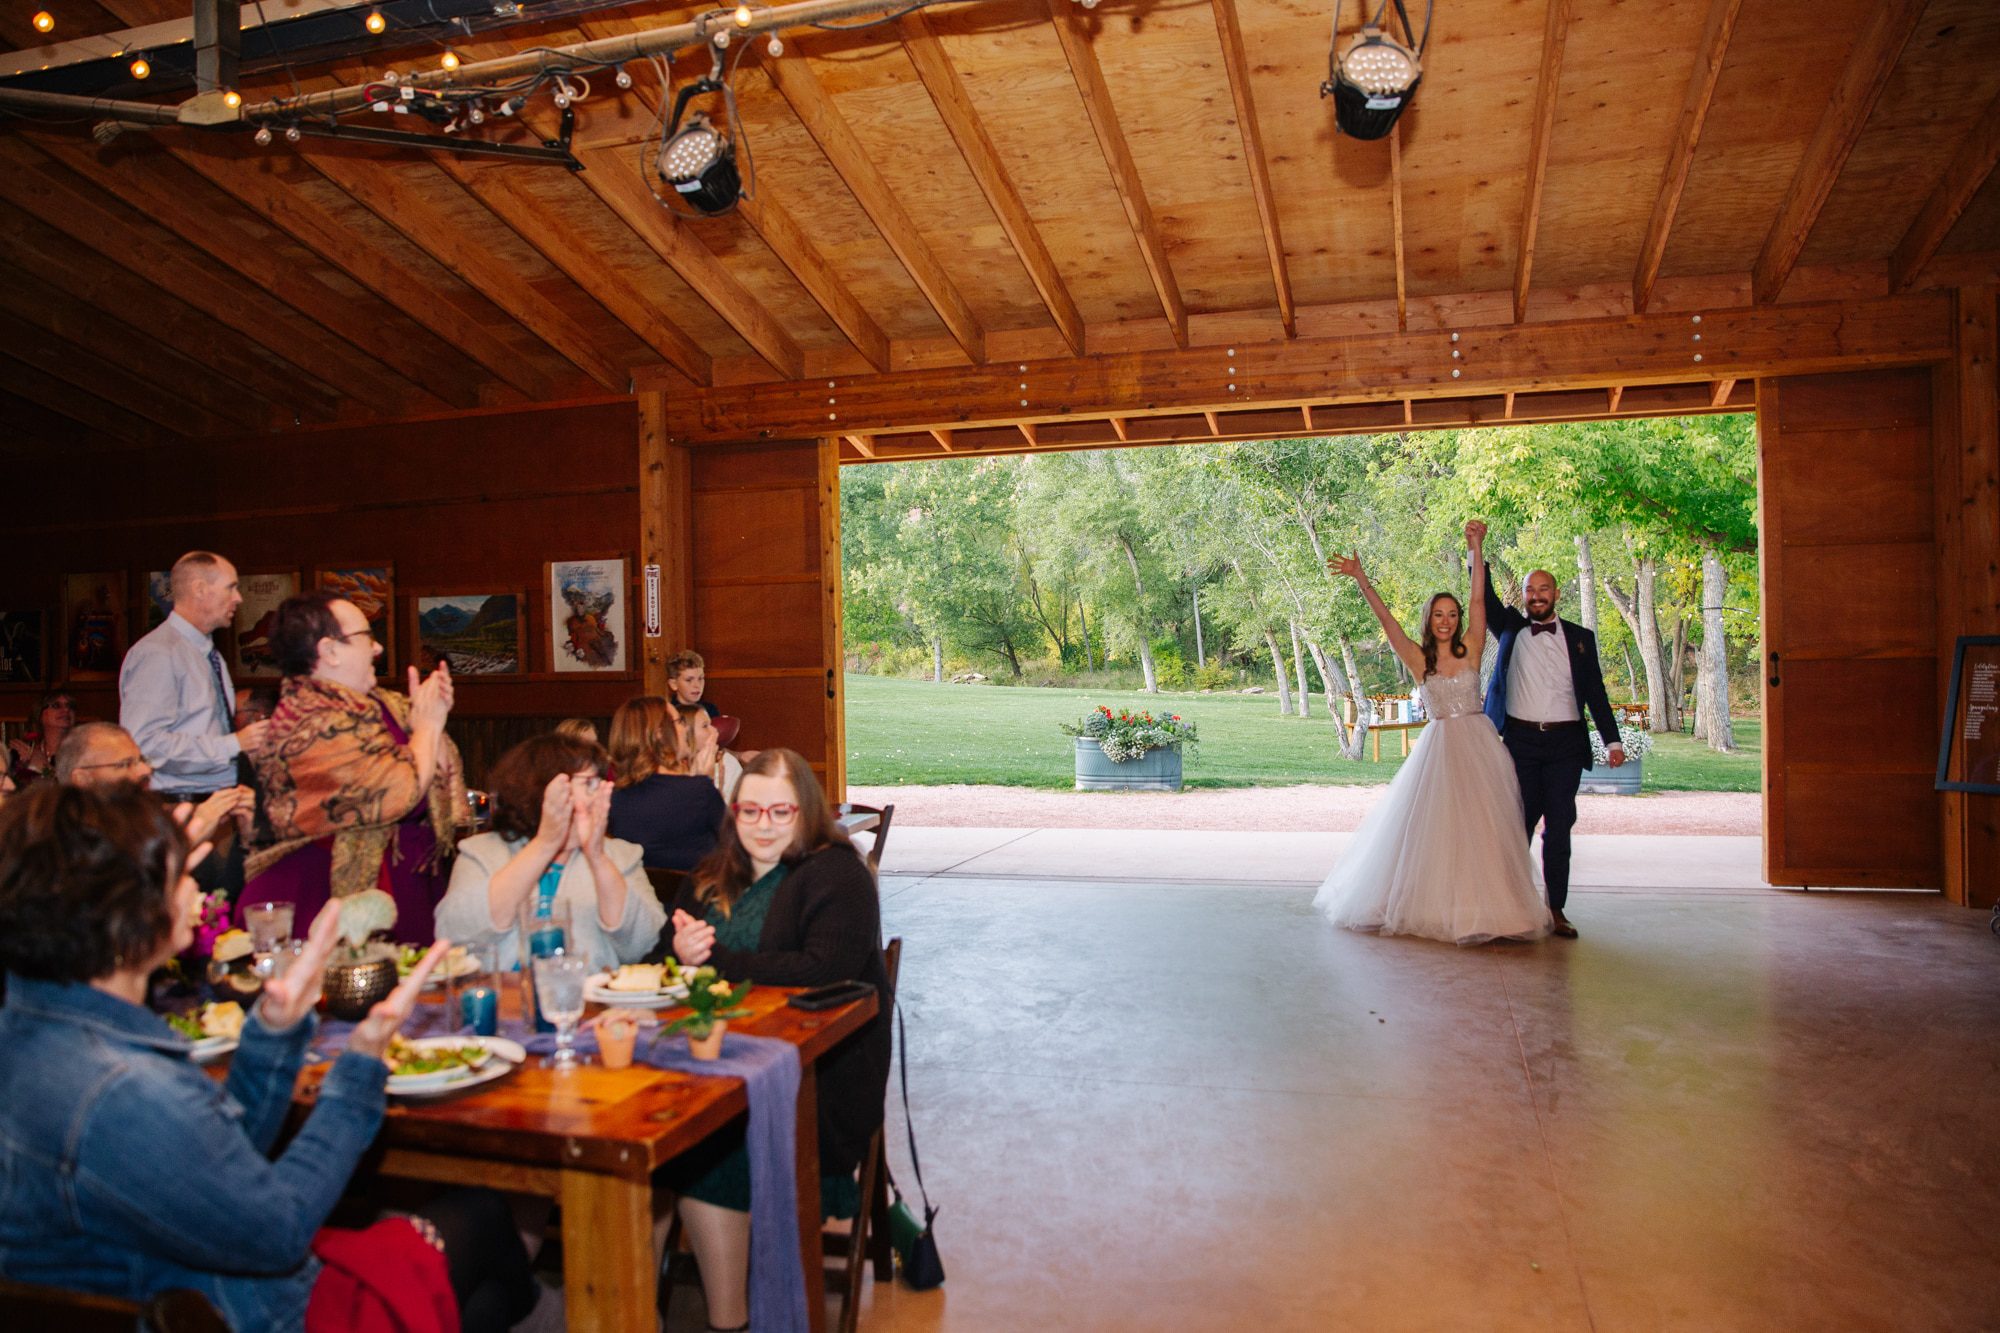 bride and groom announcement, bride and groom entering wedding reception, planet bluegrass wedding reception, indoor barn wedding, colorado wedding venues, indoor wedding venues in colorado